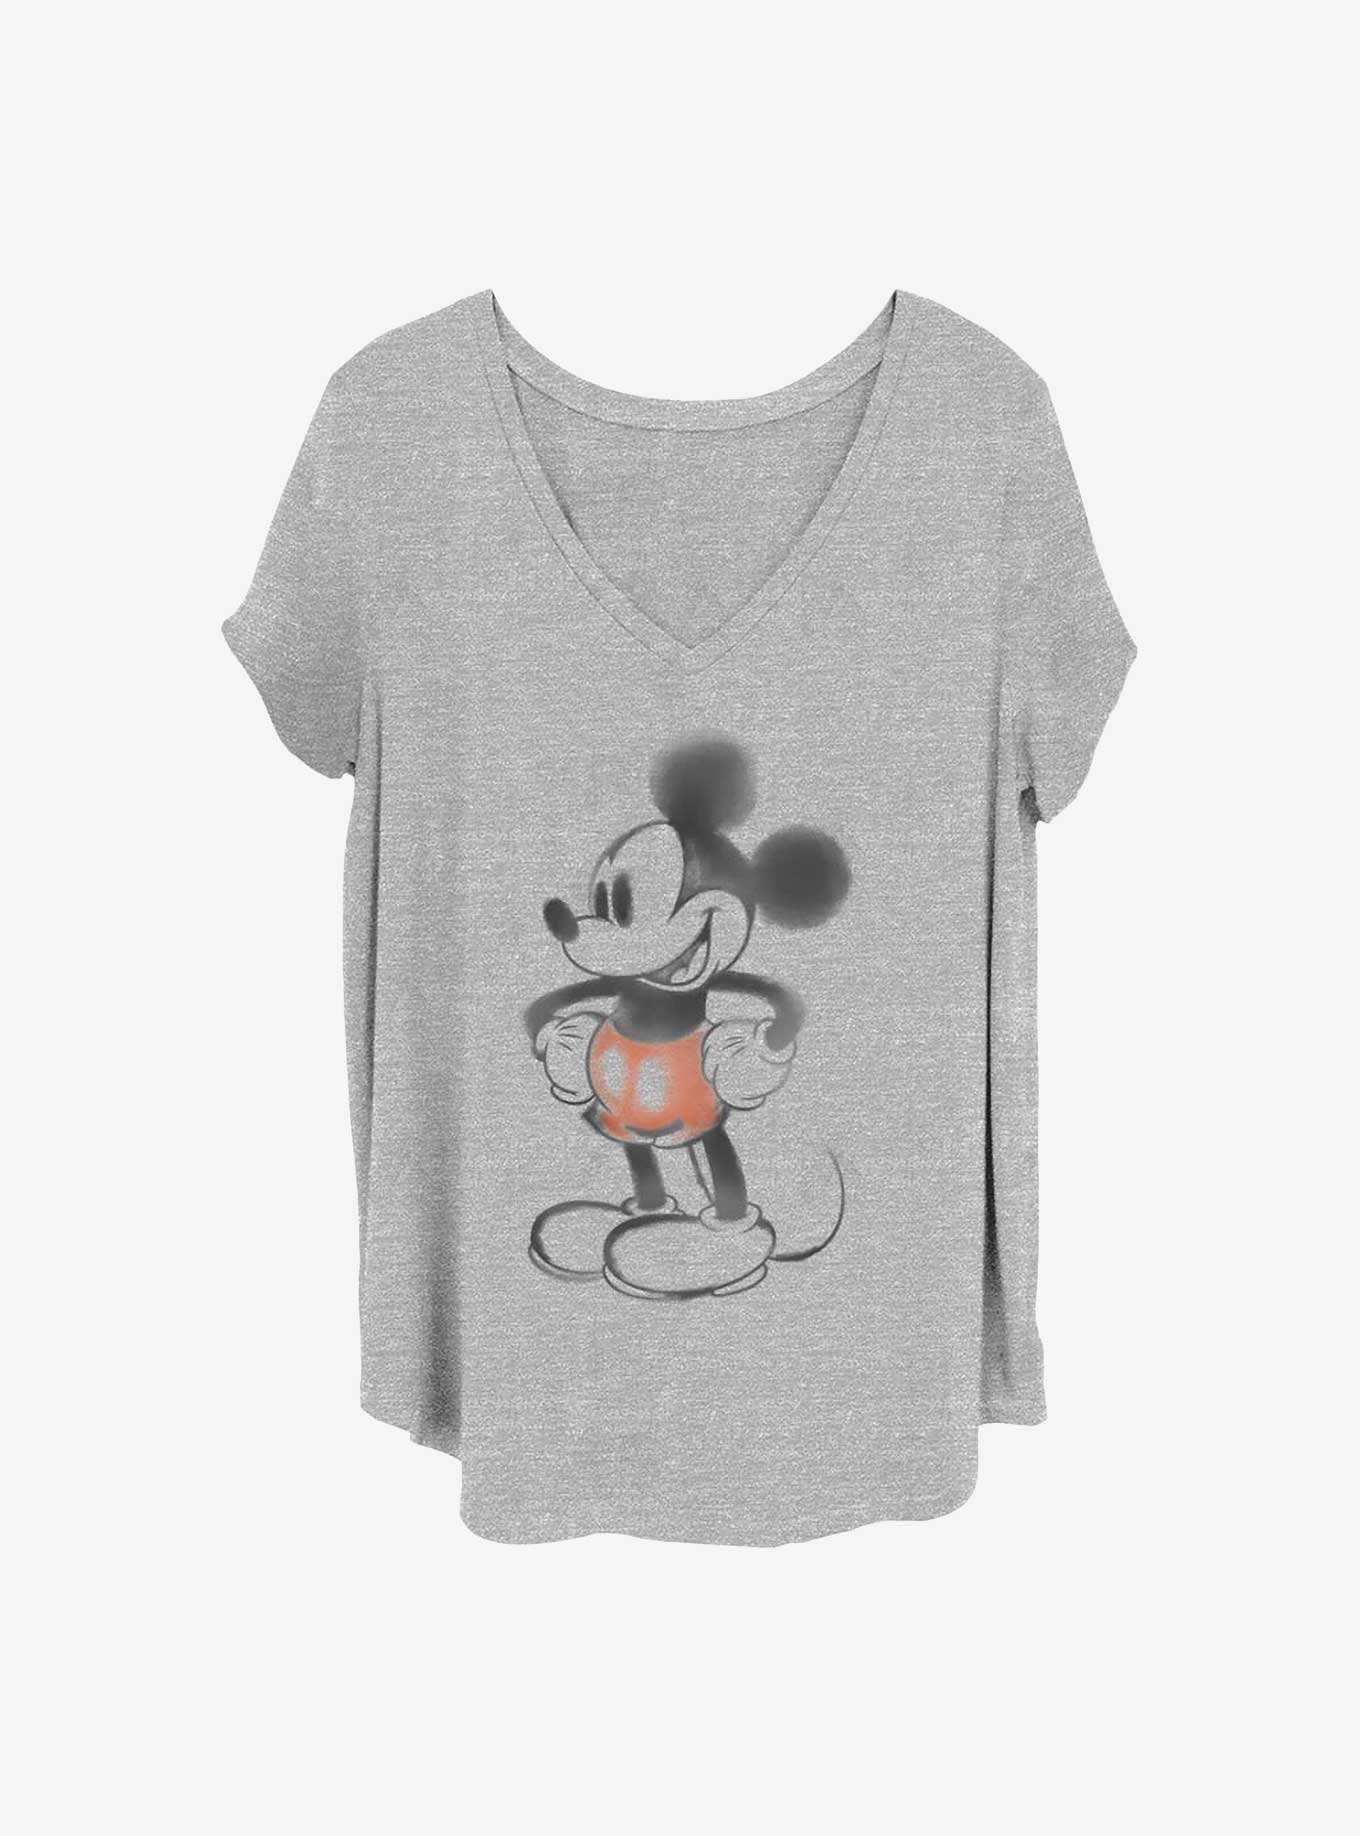 Disney Mickey Mouse Mickey Watery Girls T-Shirt Plus Size, , hi-res